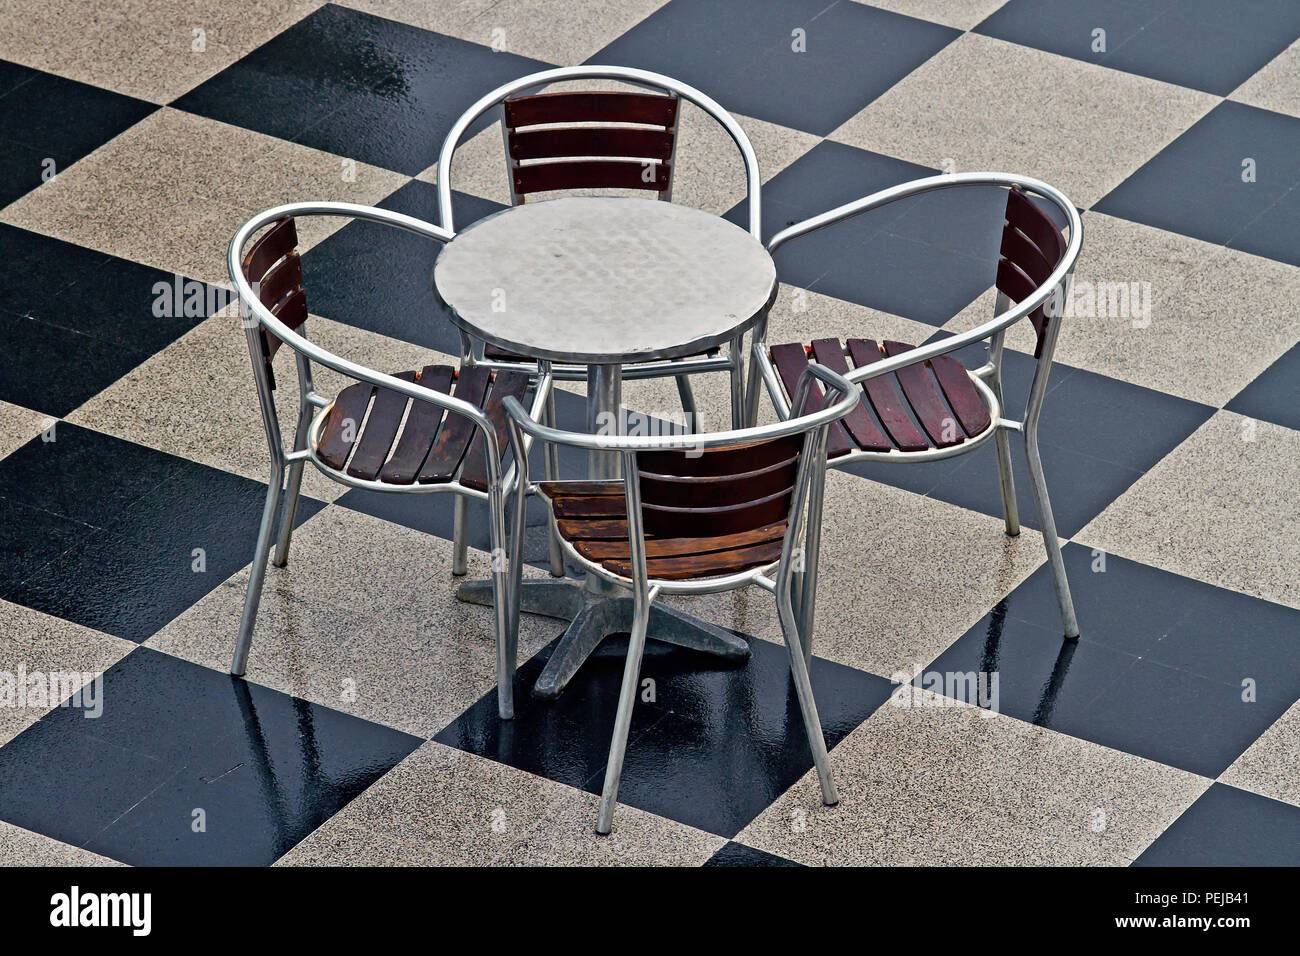 A vacant chrome table and four chairs sit unused on a checkerboard tile floor. Stock Photo